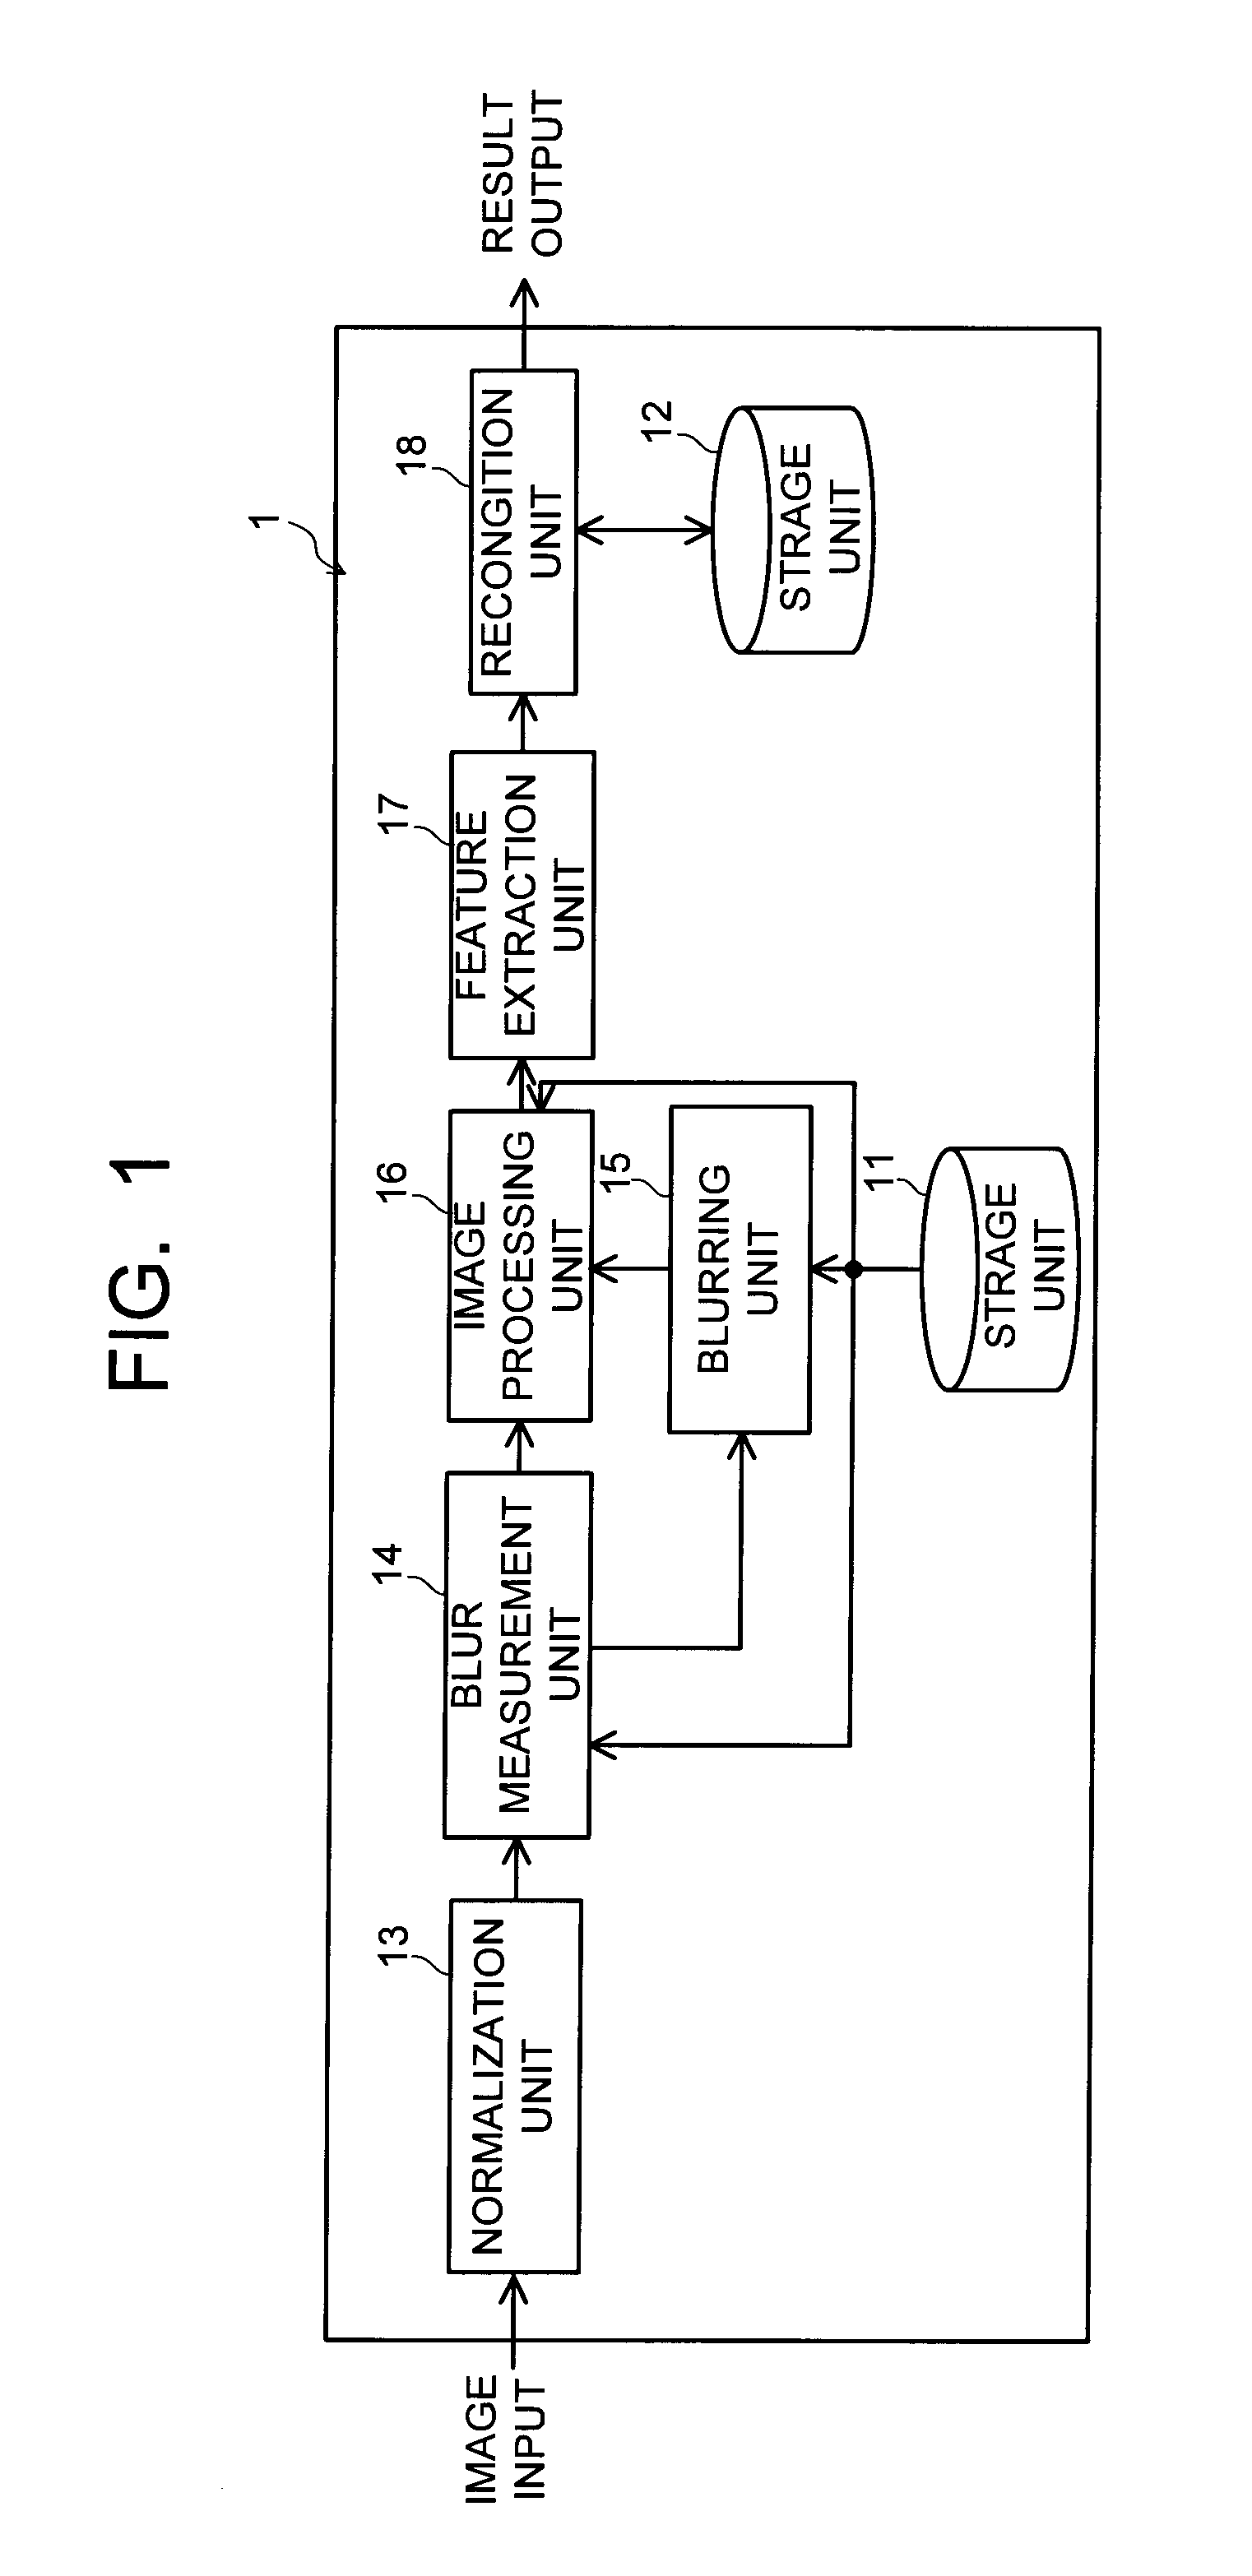 Image recognition apparatus and image recognition method